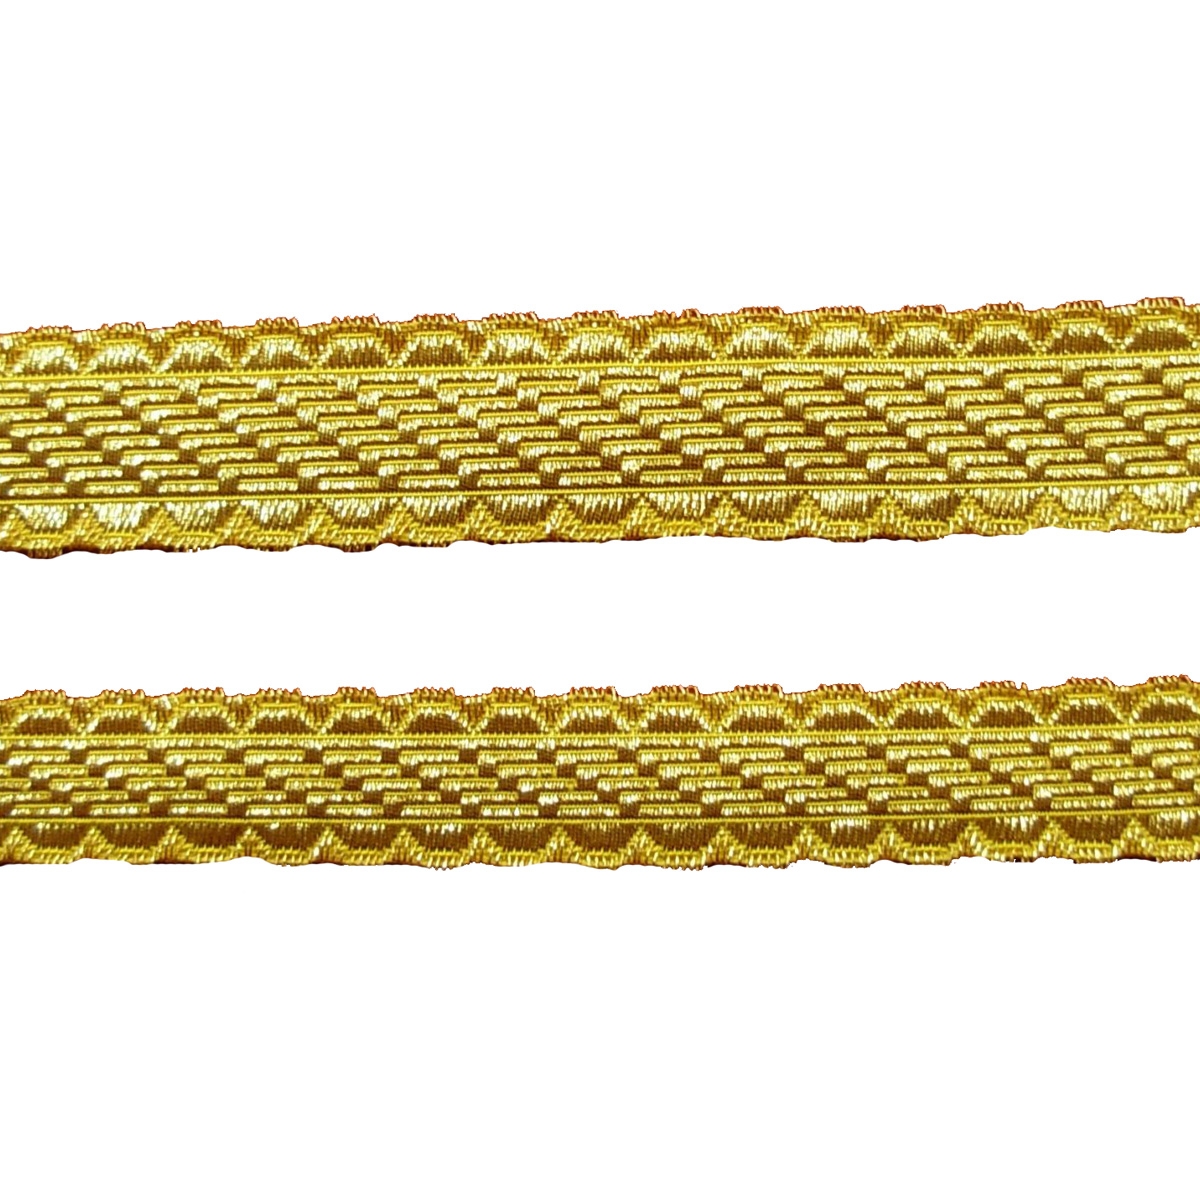 Braid (except guard), gold or silver, 15, 18, 23, 27, 34 mm.customized best quality